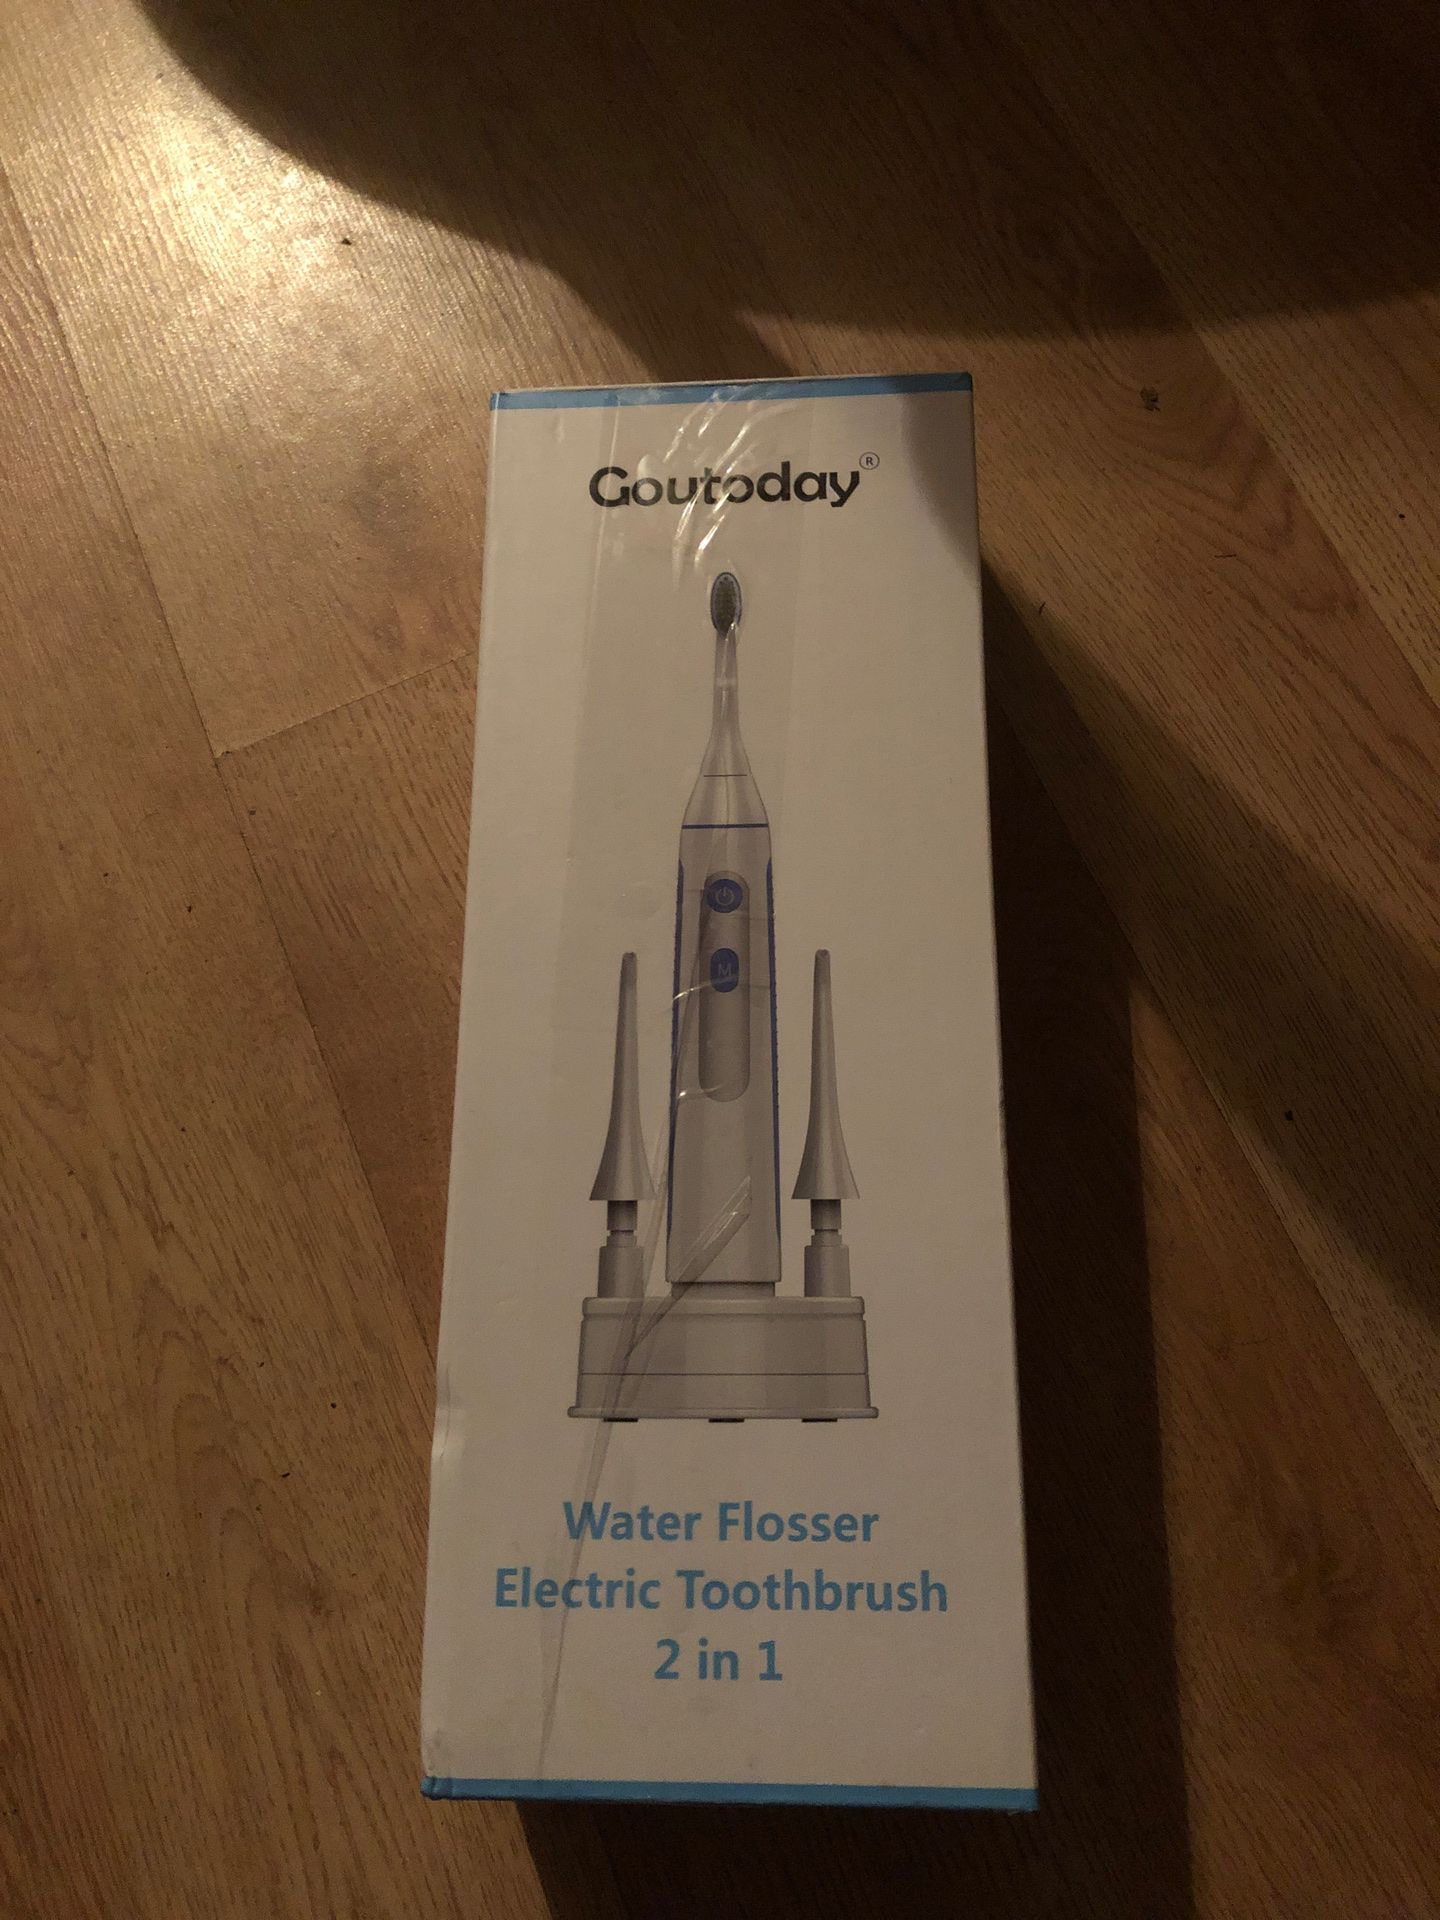 Water flosser and Electric Toothbrush (2in1)